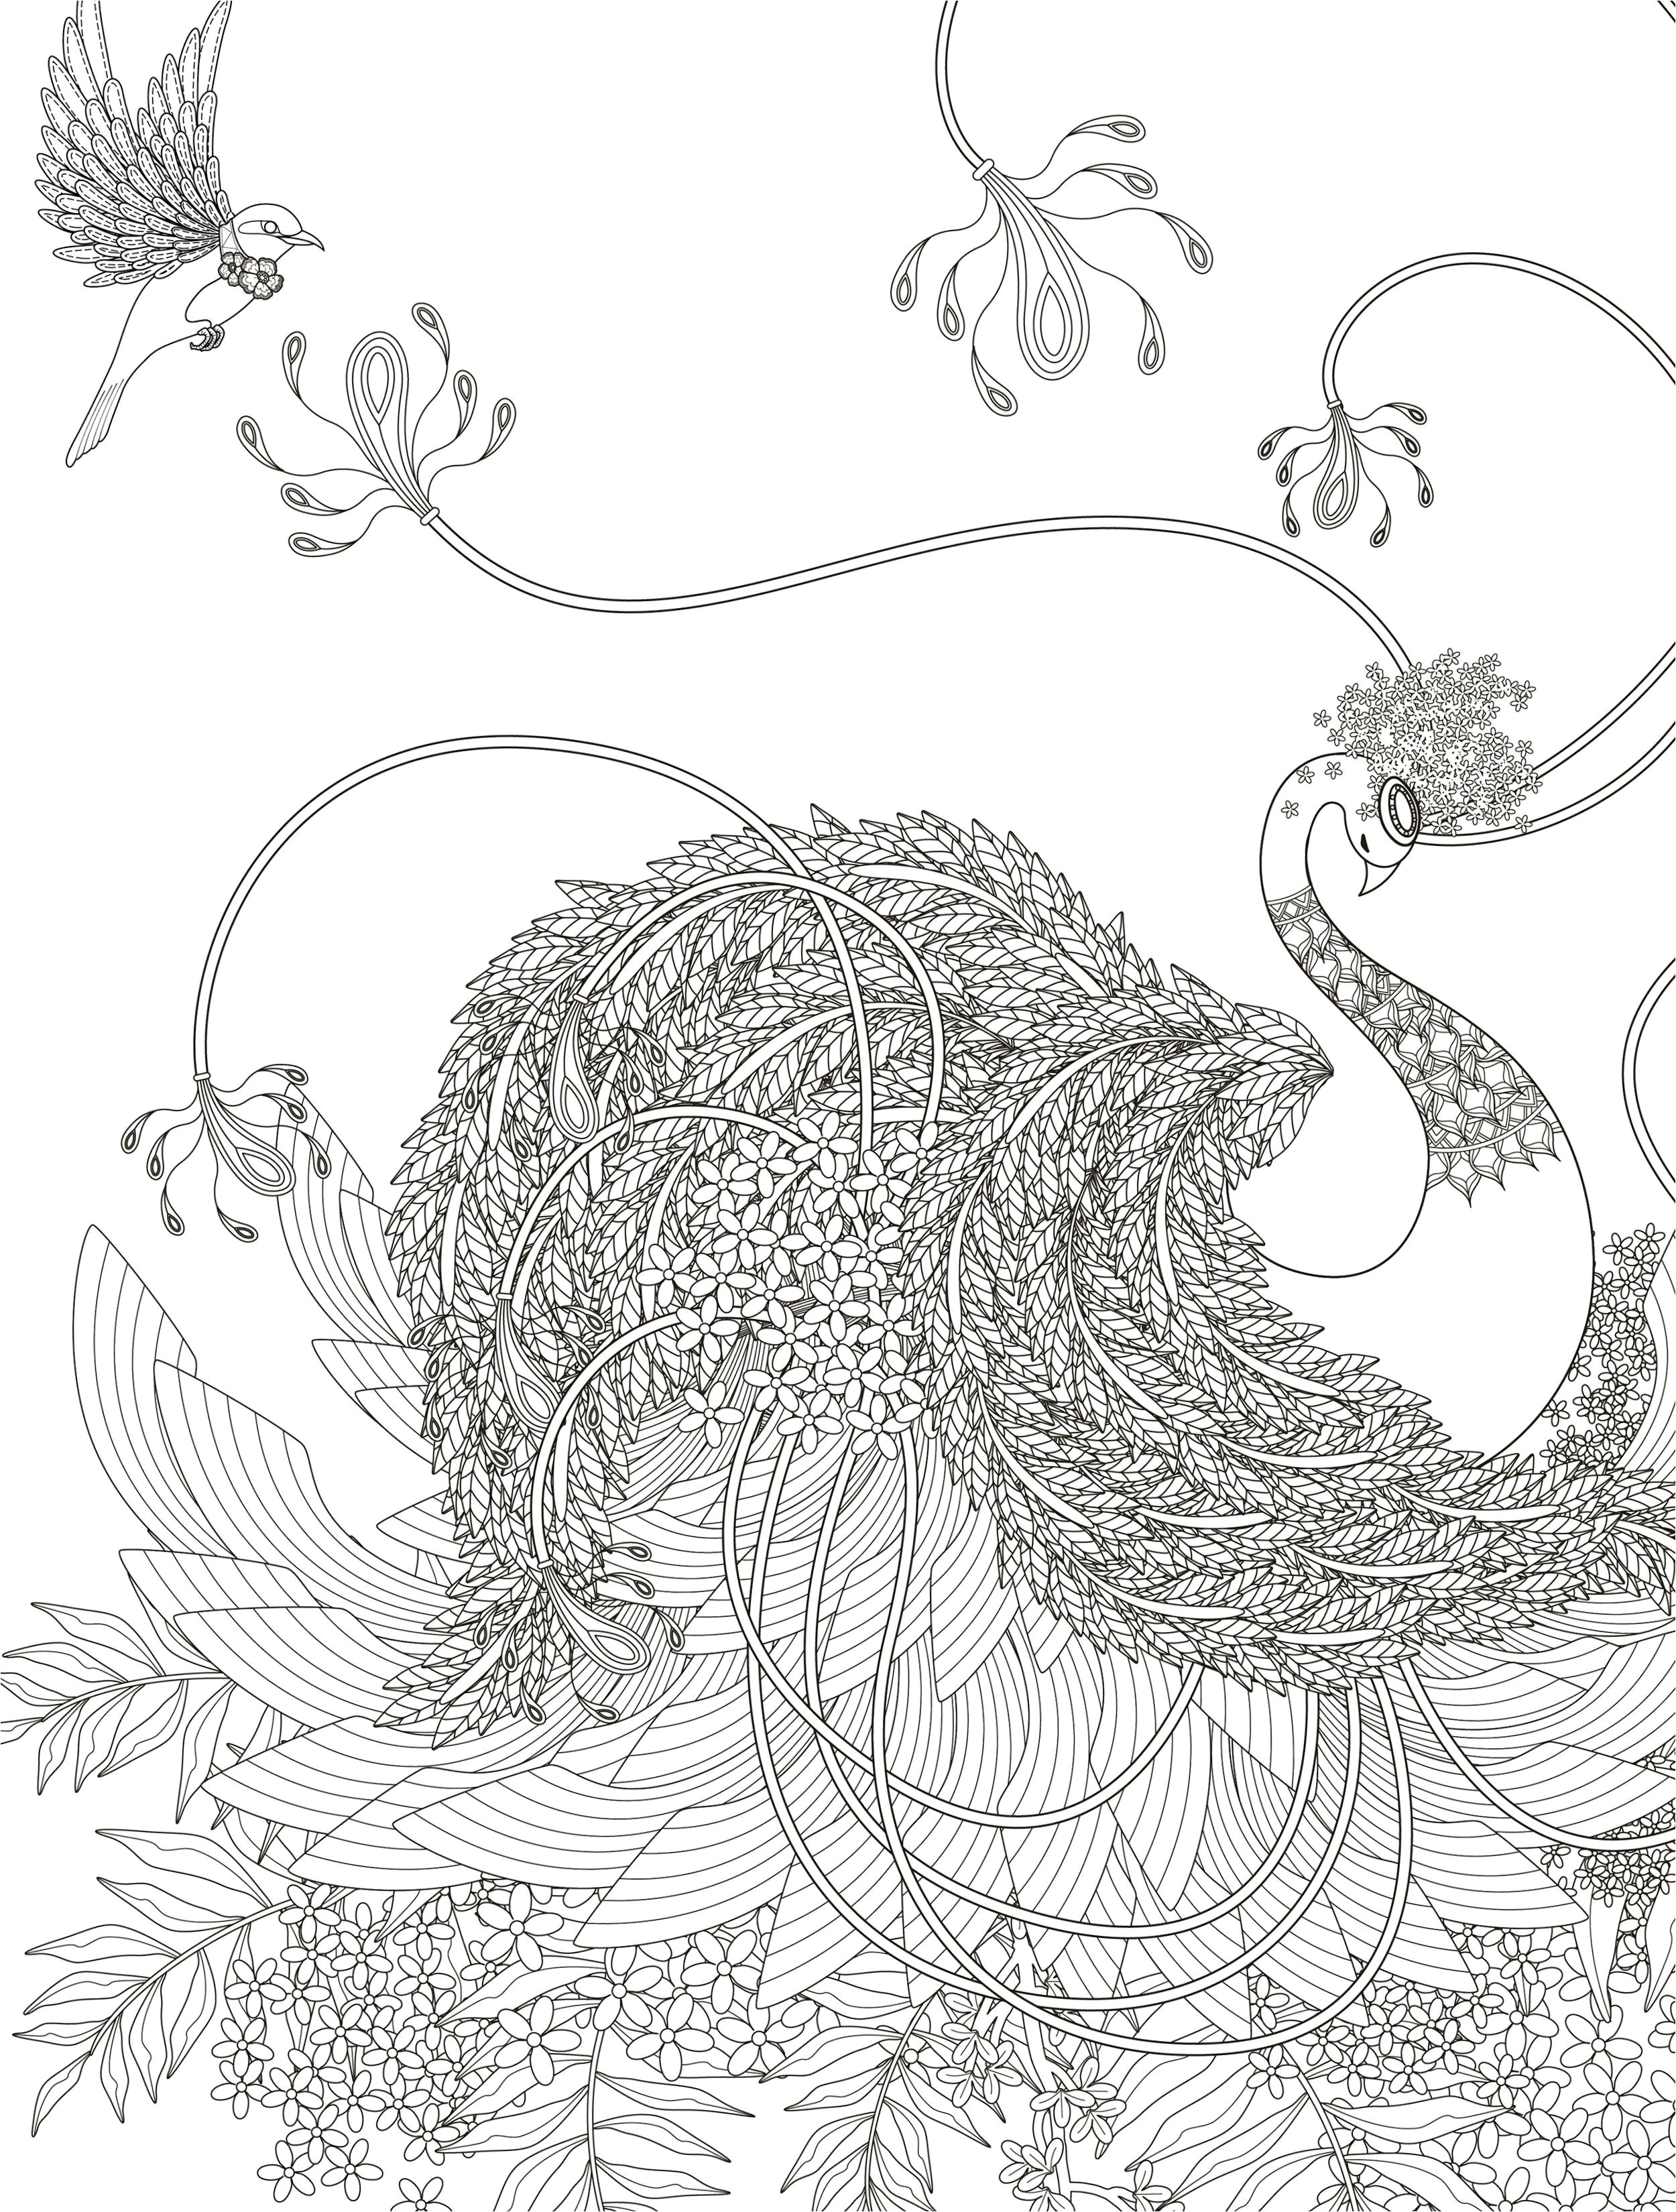 Awesome Drawing Of Dragons Coloriage De Cuisine Inspire Cool Coloriage Jeux Awesome Jeux De